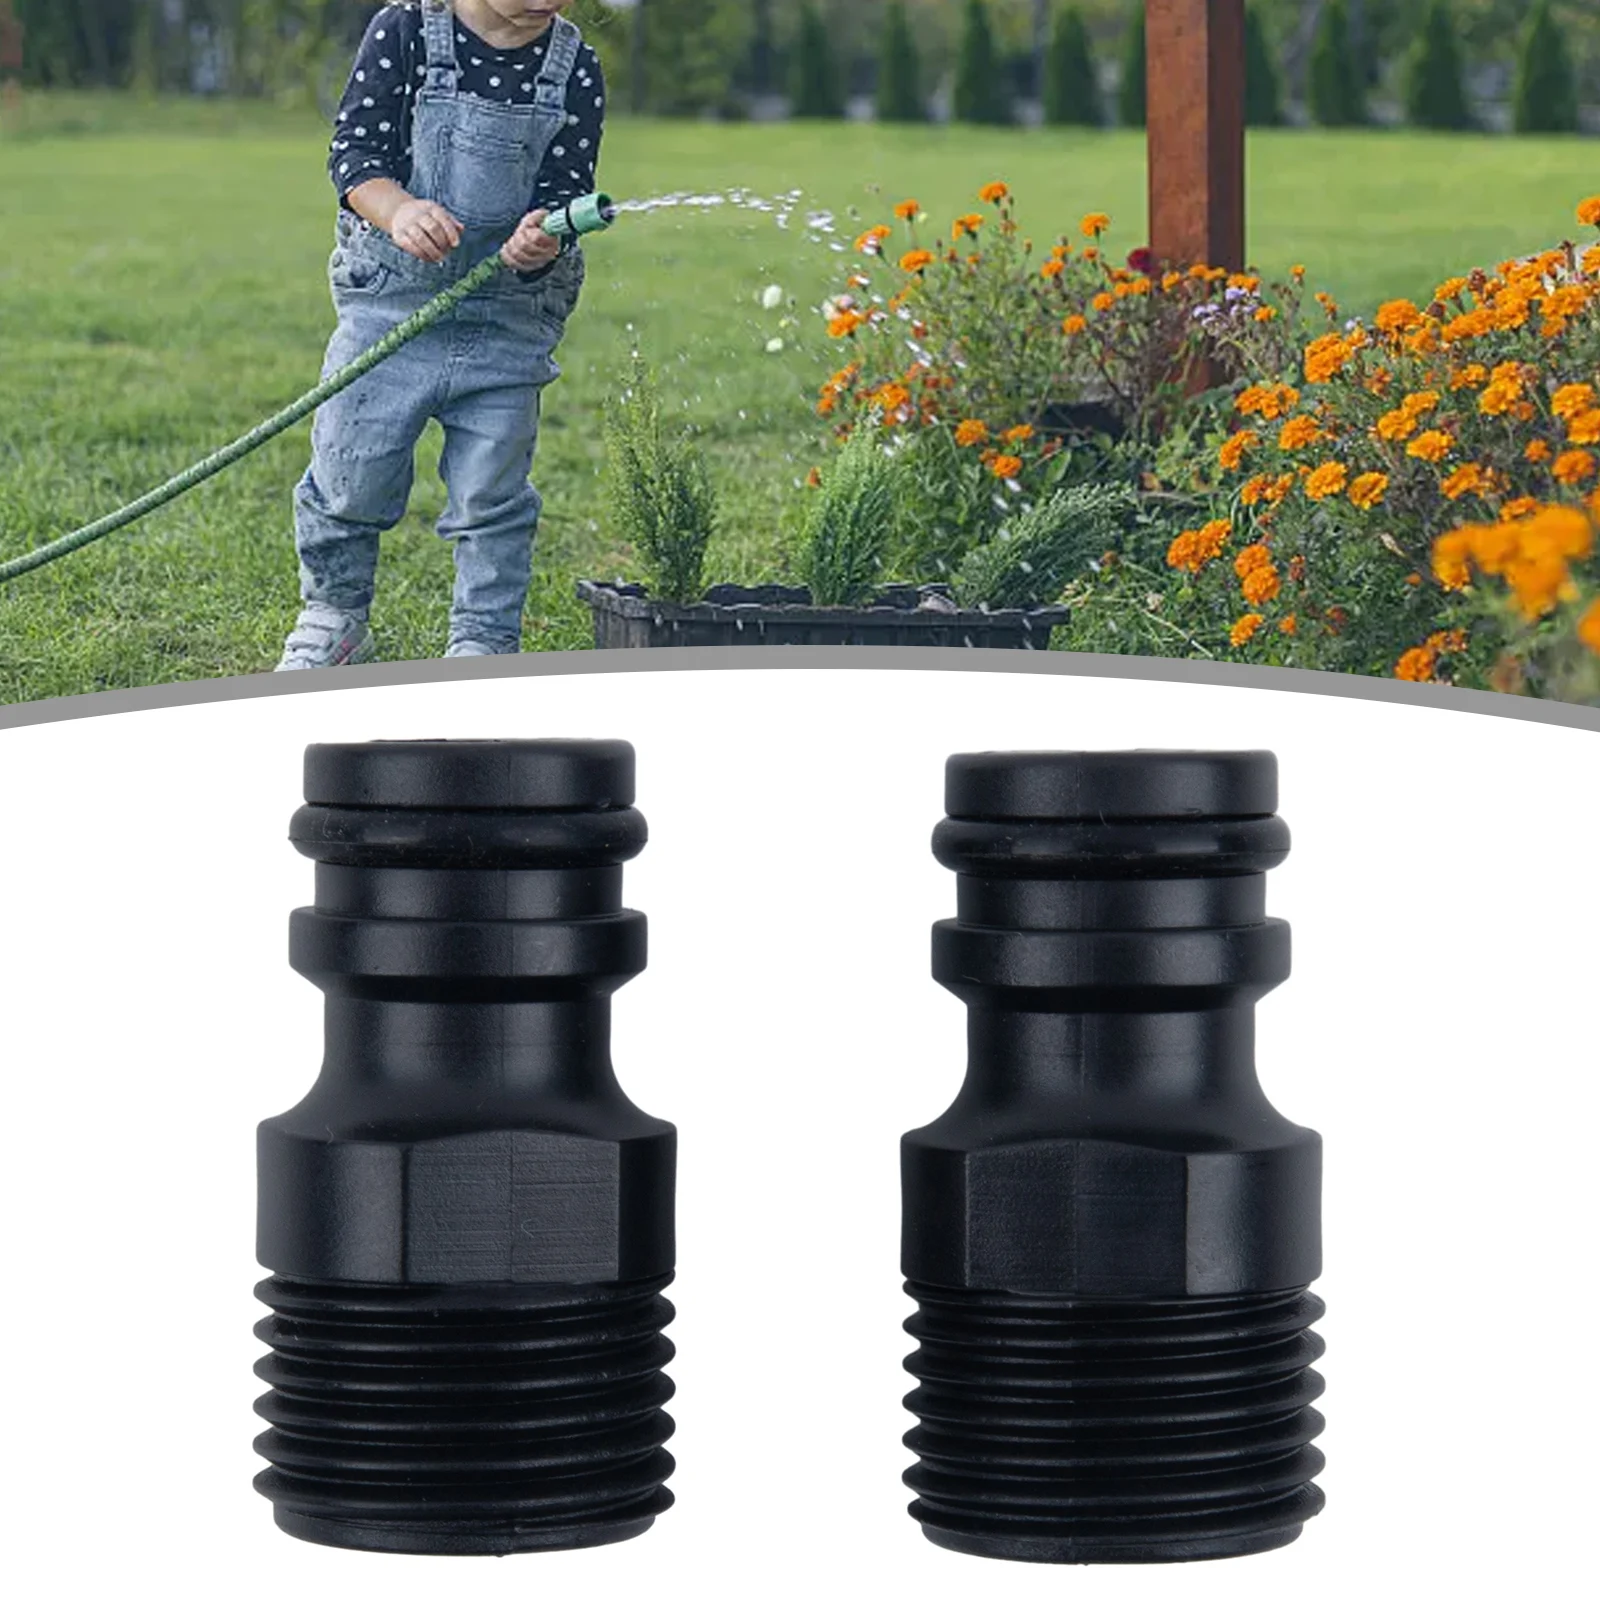 

2 PCS Threaded Tap Adaptors 1/2" BSP Garden Water Hose Quick Pipe Connector Fitting Garden Irrigation System Part Adapters